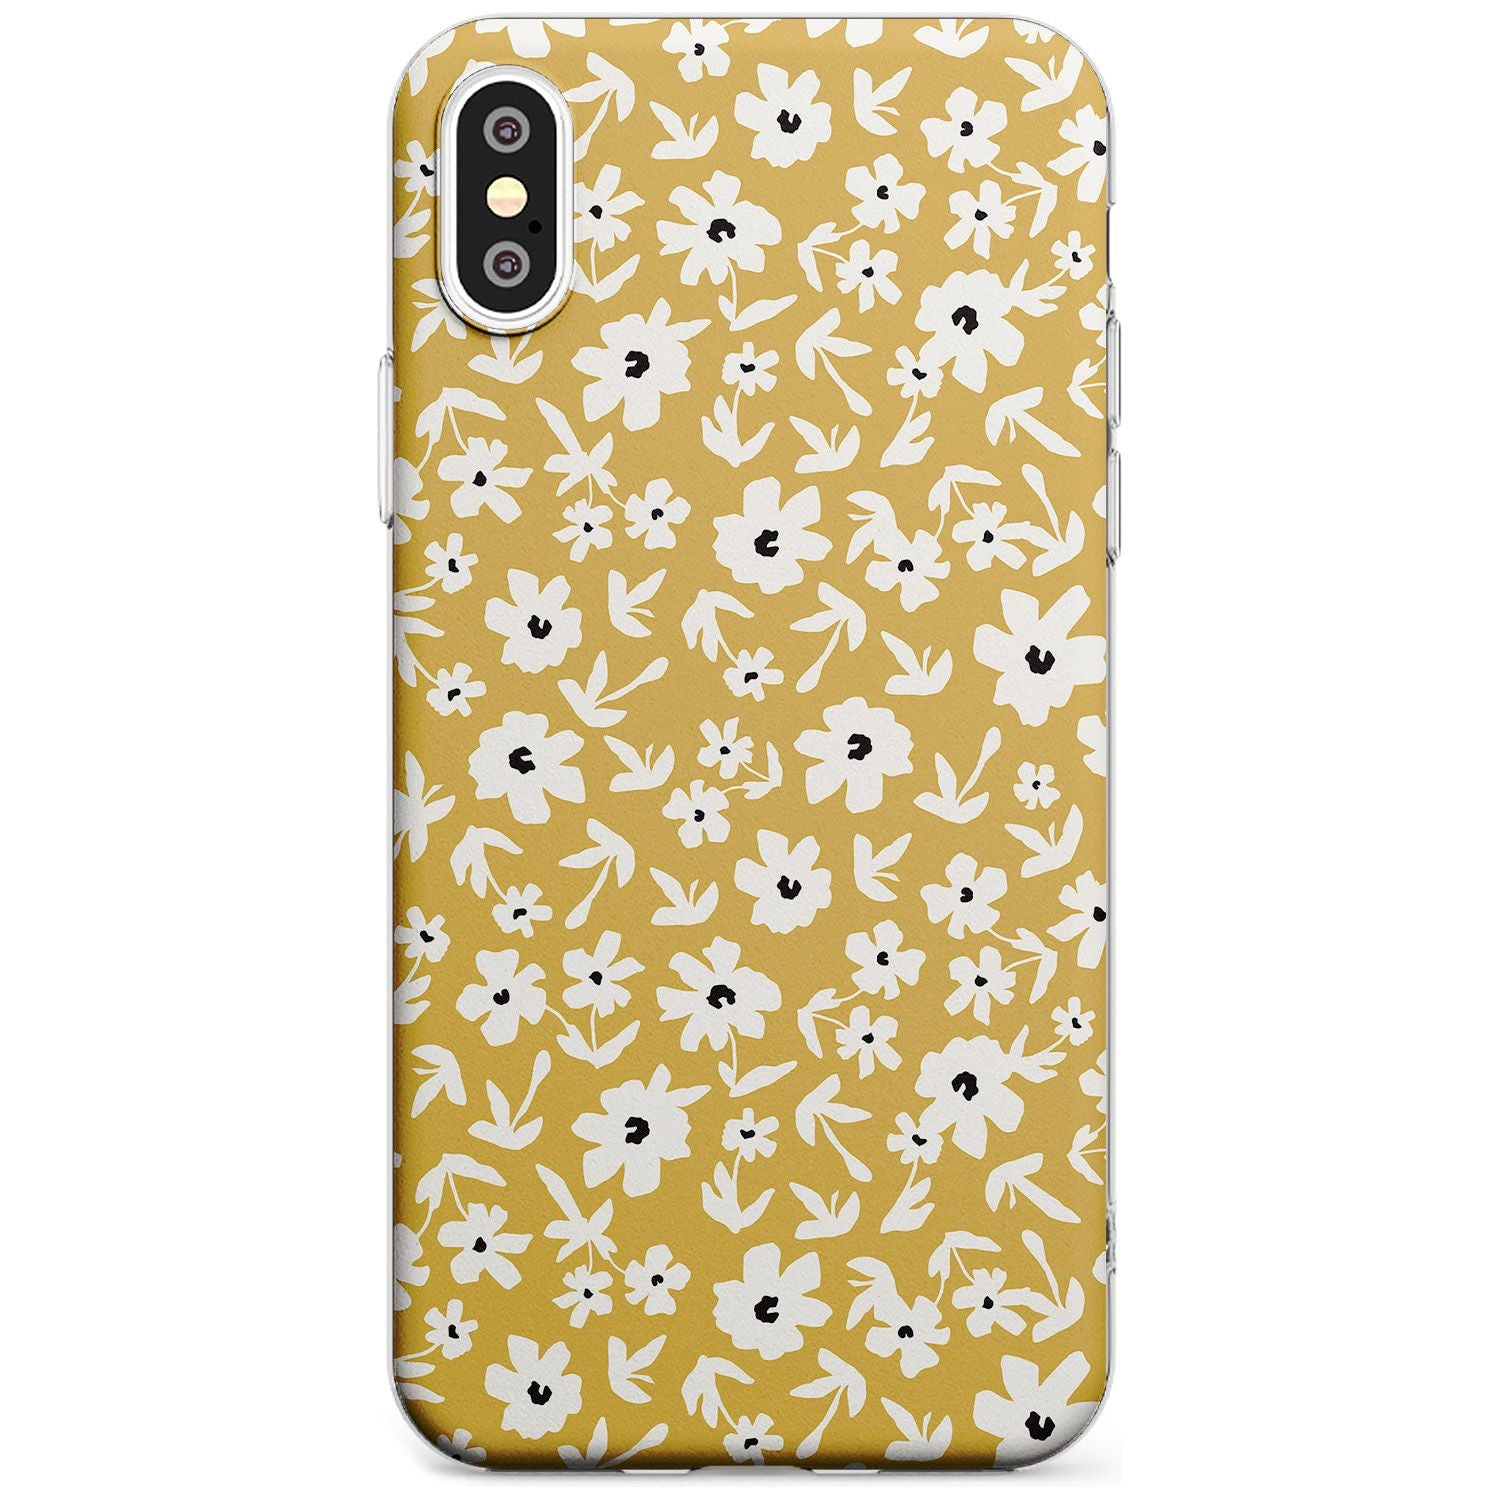 Floral Print on Mustard - Cute Floral Design Black Impact Phone Case for iPhone X XS Max XR